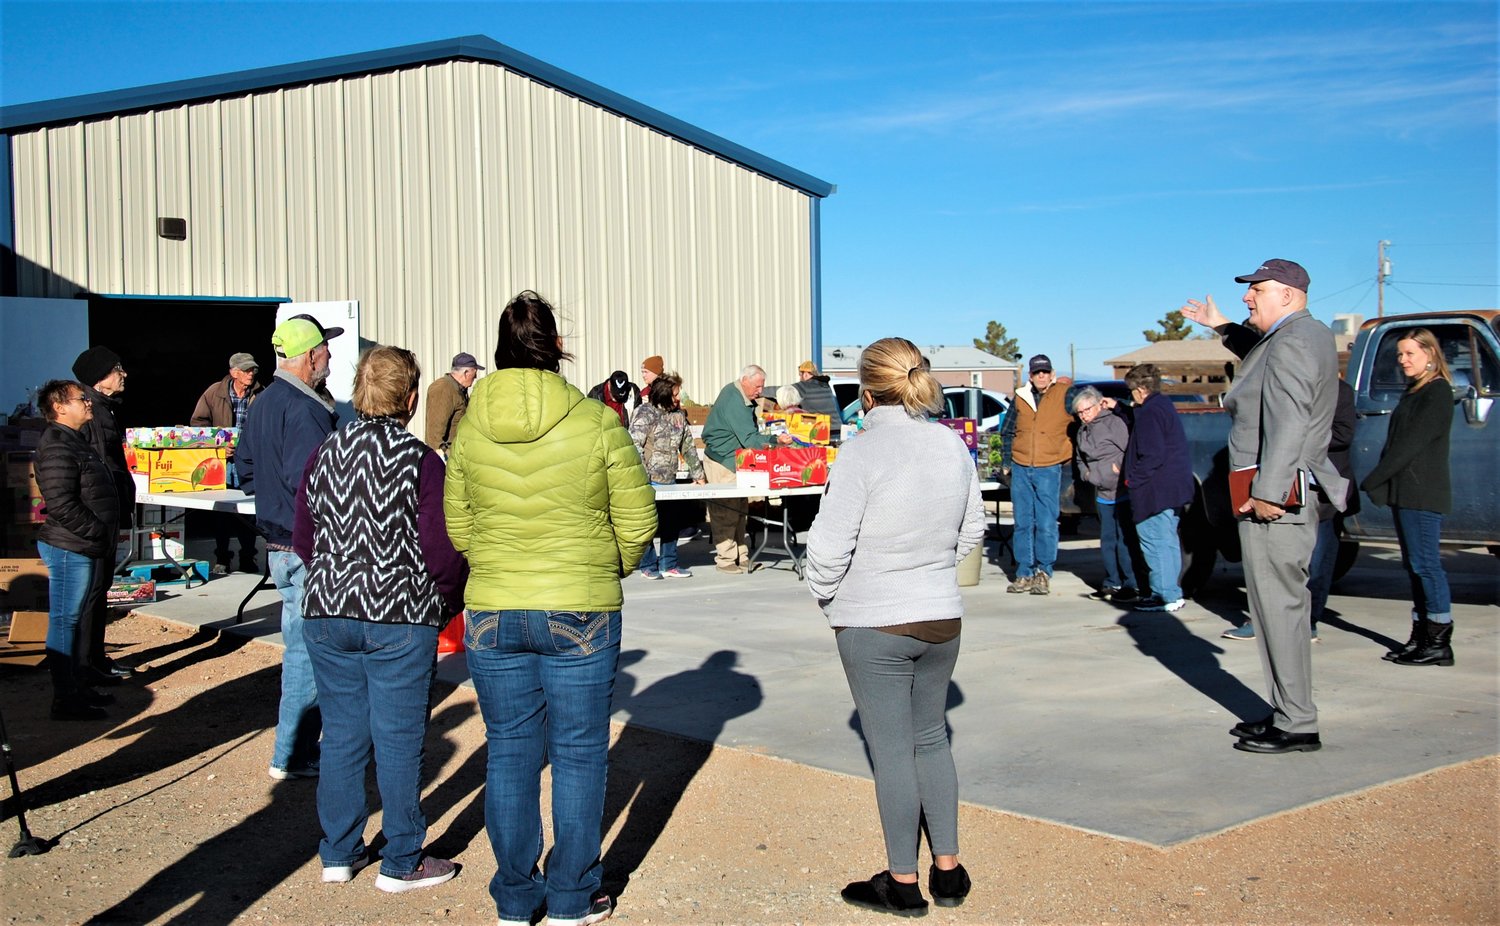 East Mesa Baptist Church interim Pastor Stephen Kovach welcomes East Mesa residents, visitors and volunteers to the dedication of the church’s new food pantry.